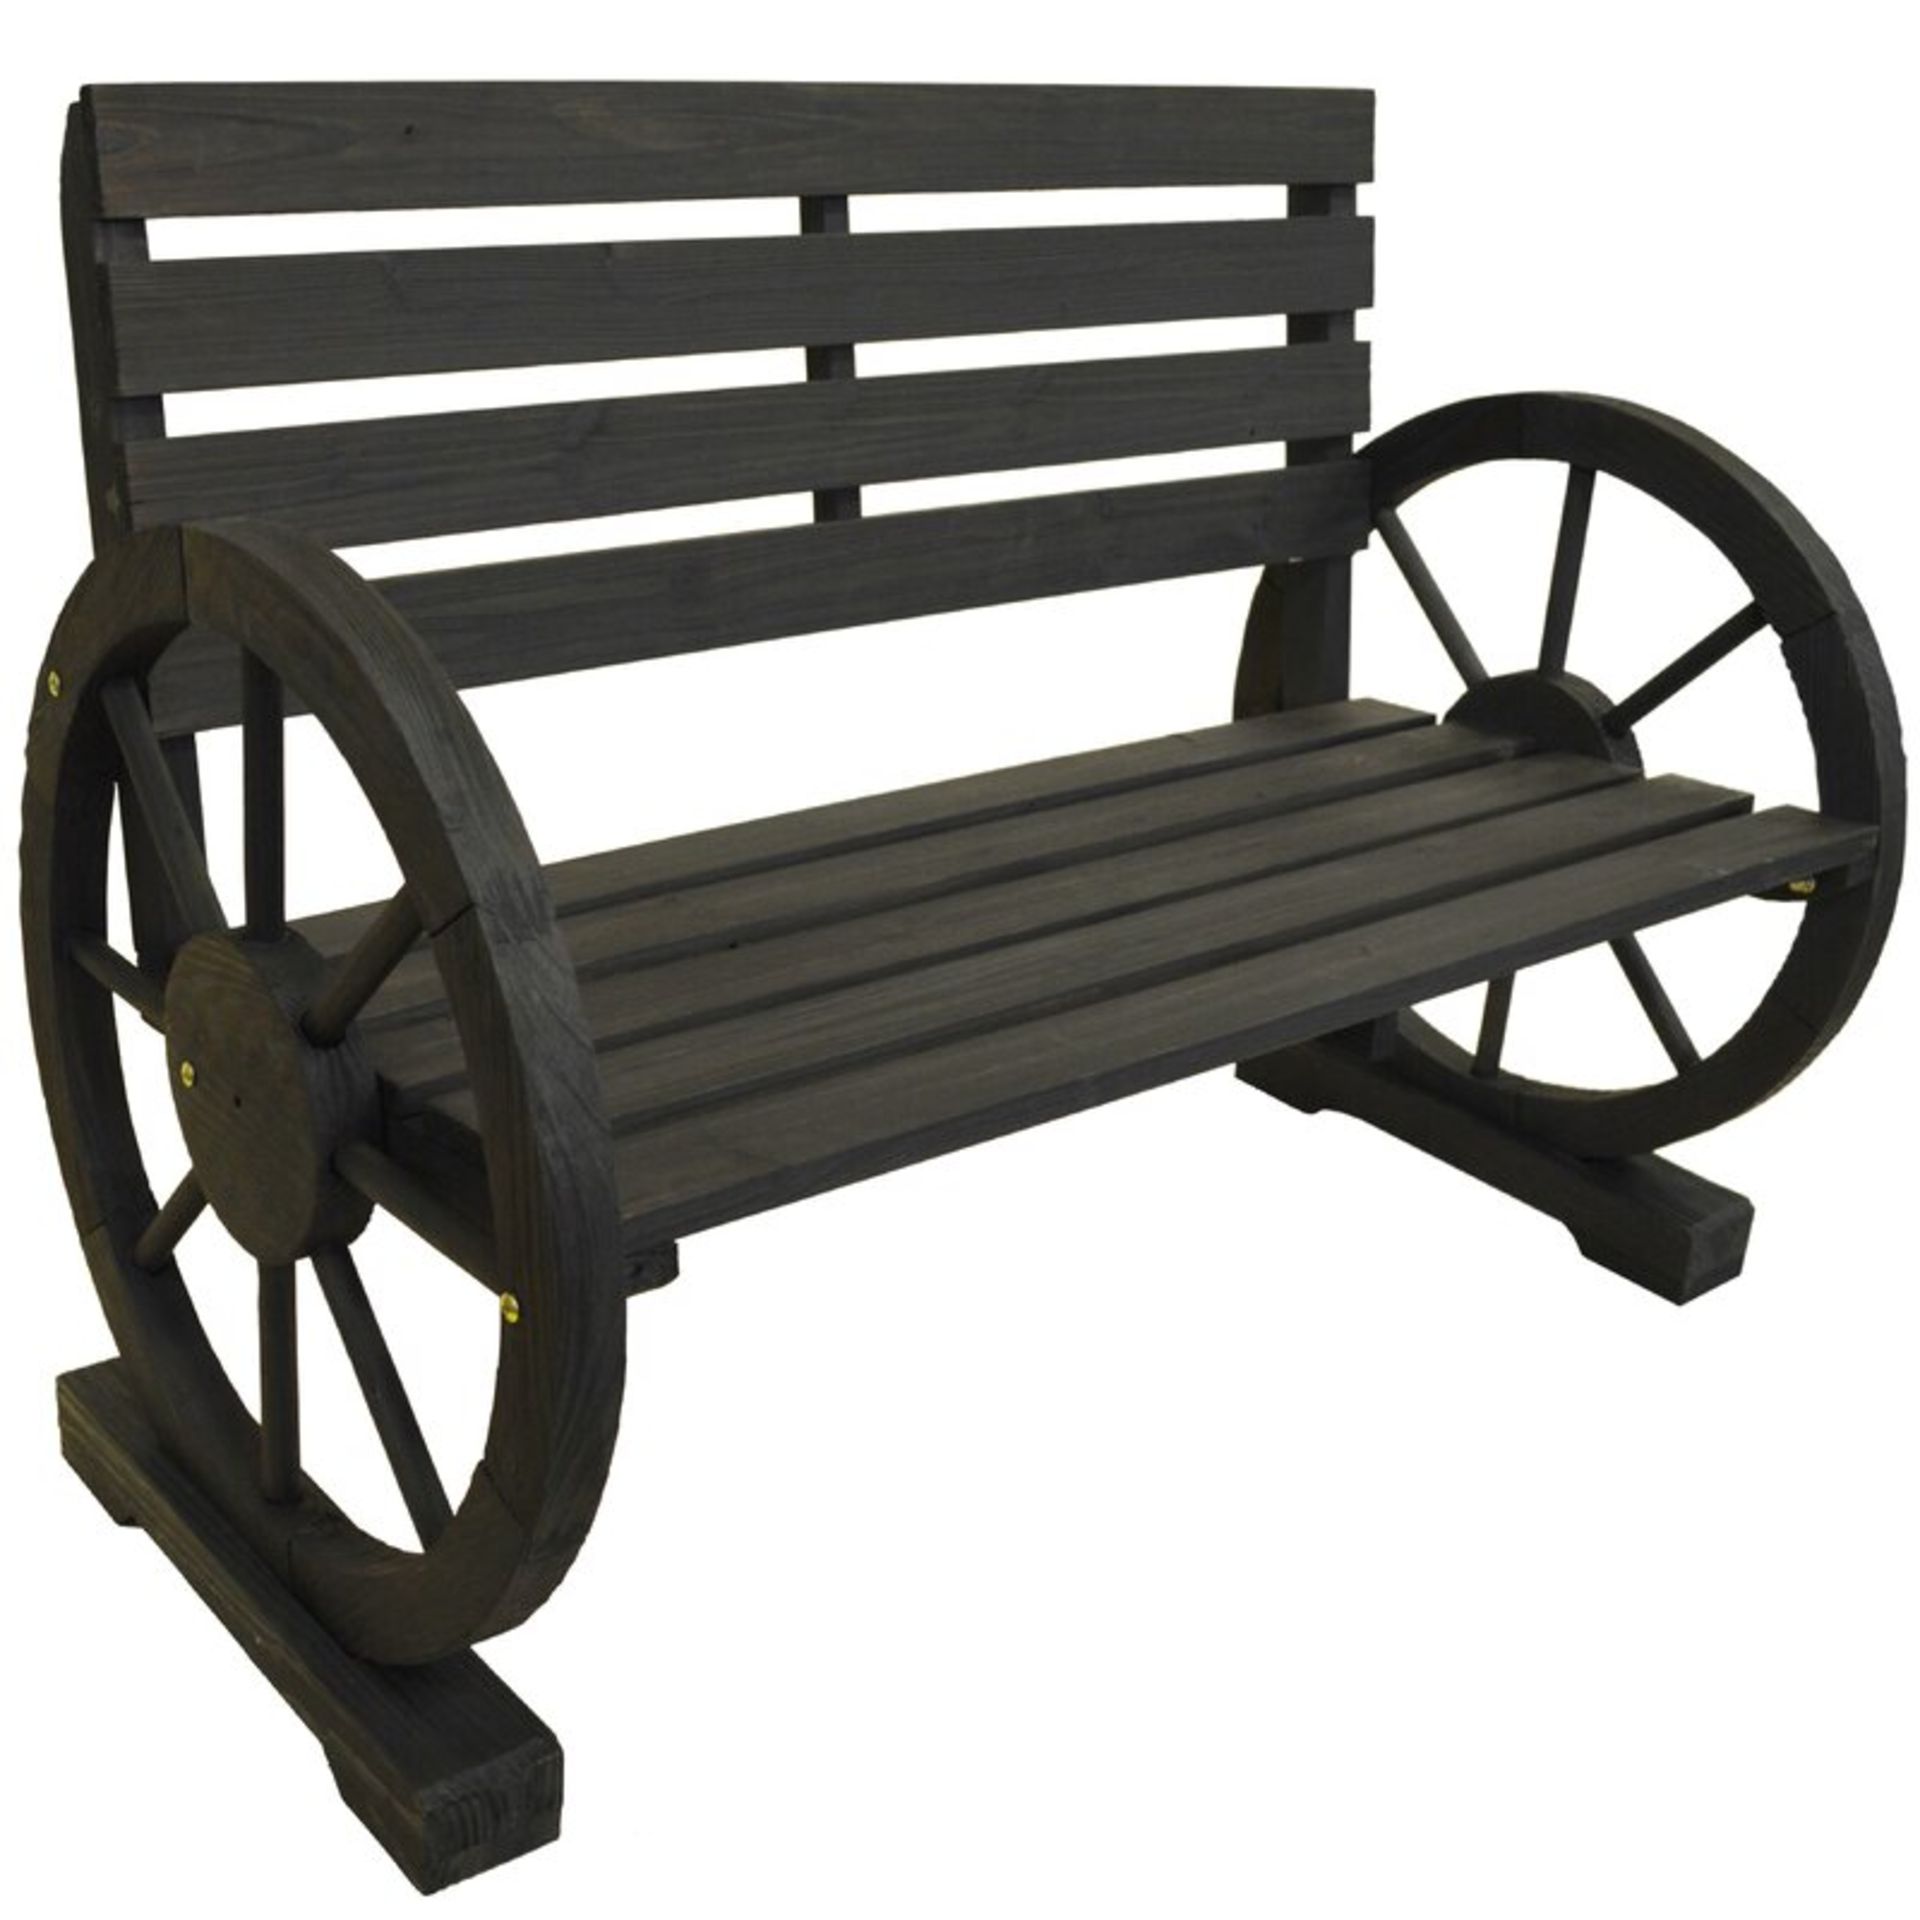 Stollings Wooden Traditional Bench -RRP £127.99 - Image 3 of 3